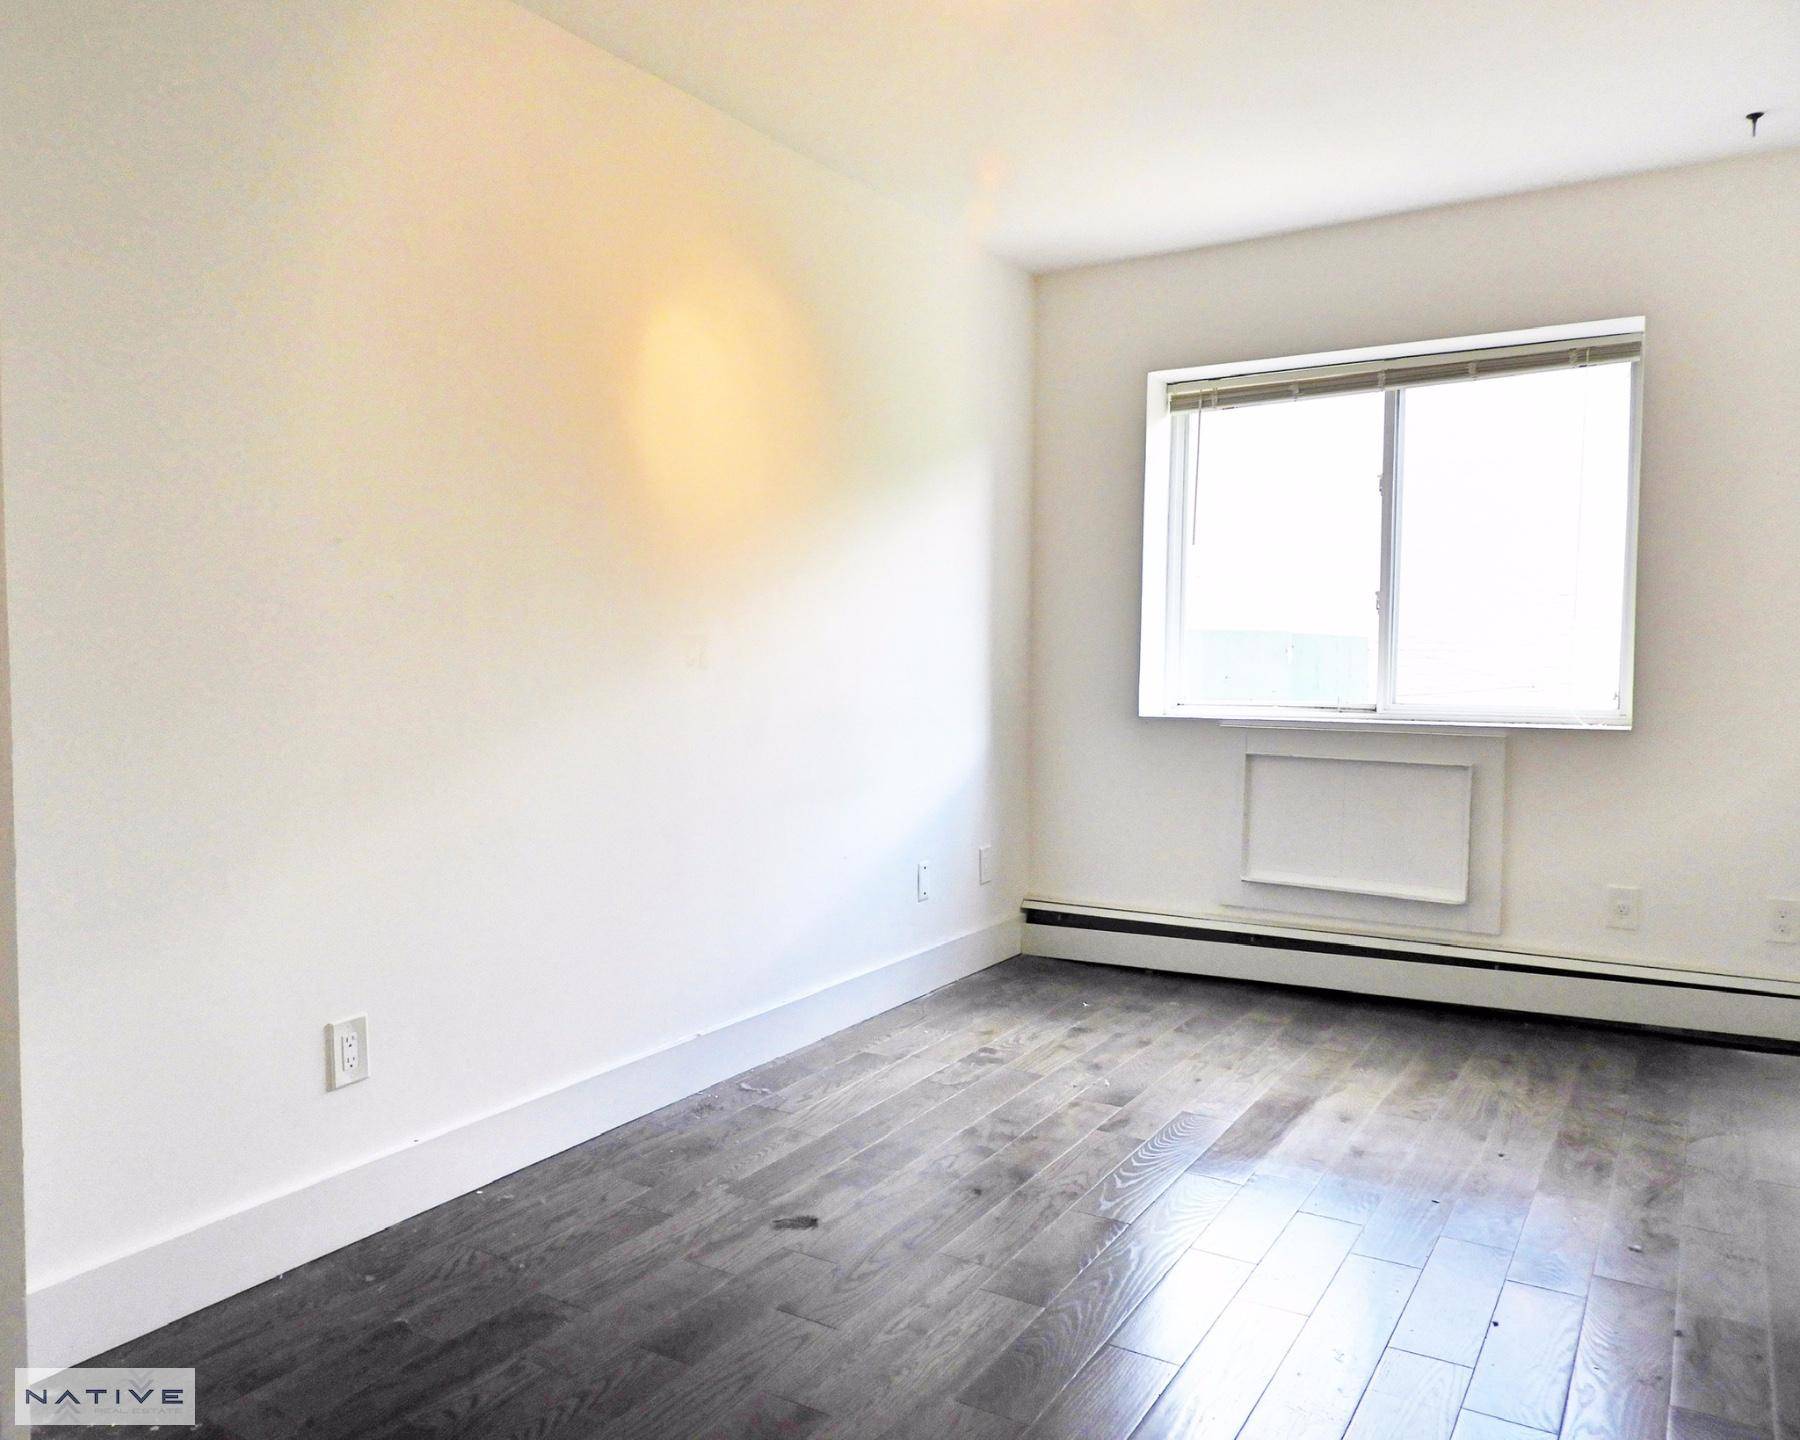 This brand new Brooklyn apartment has everything you could ask for !